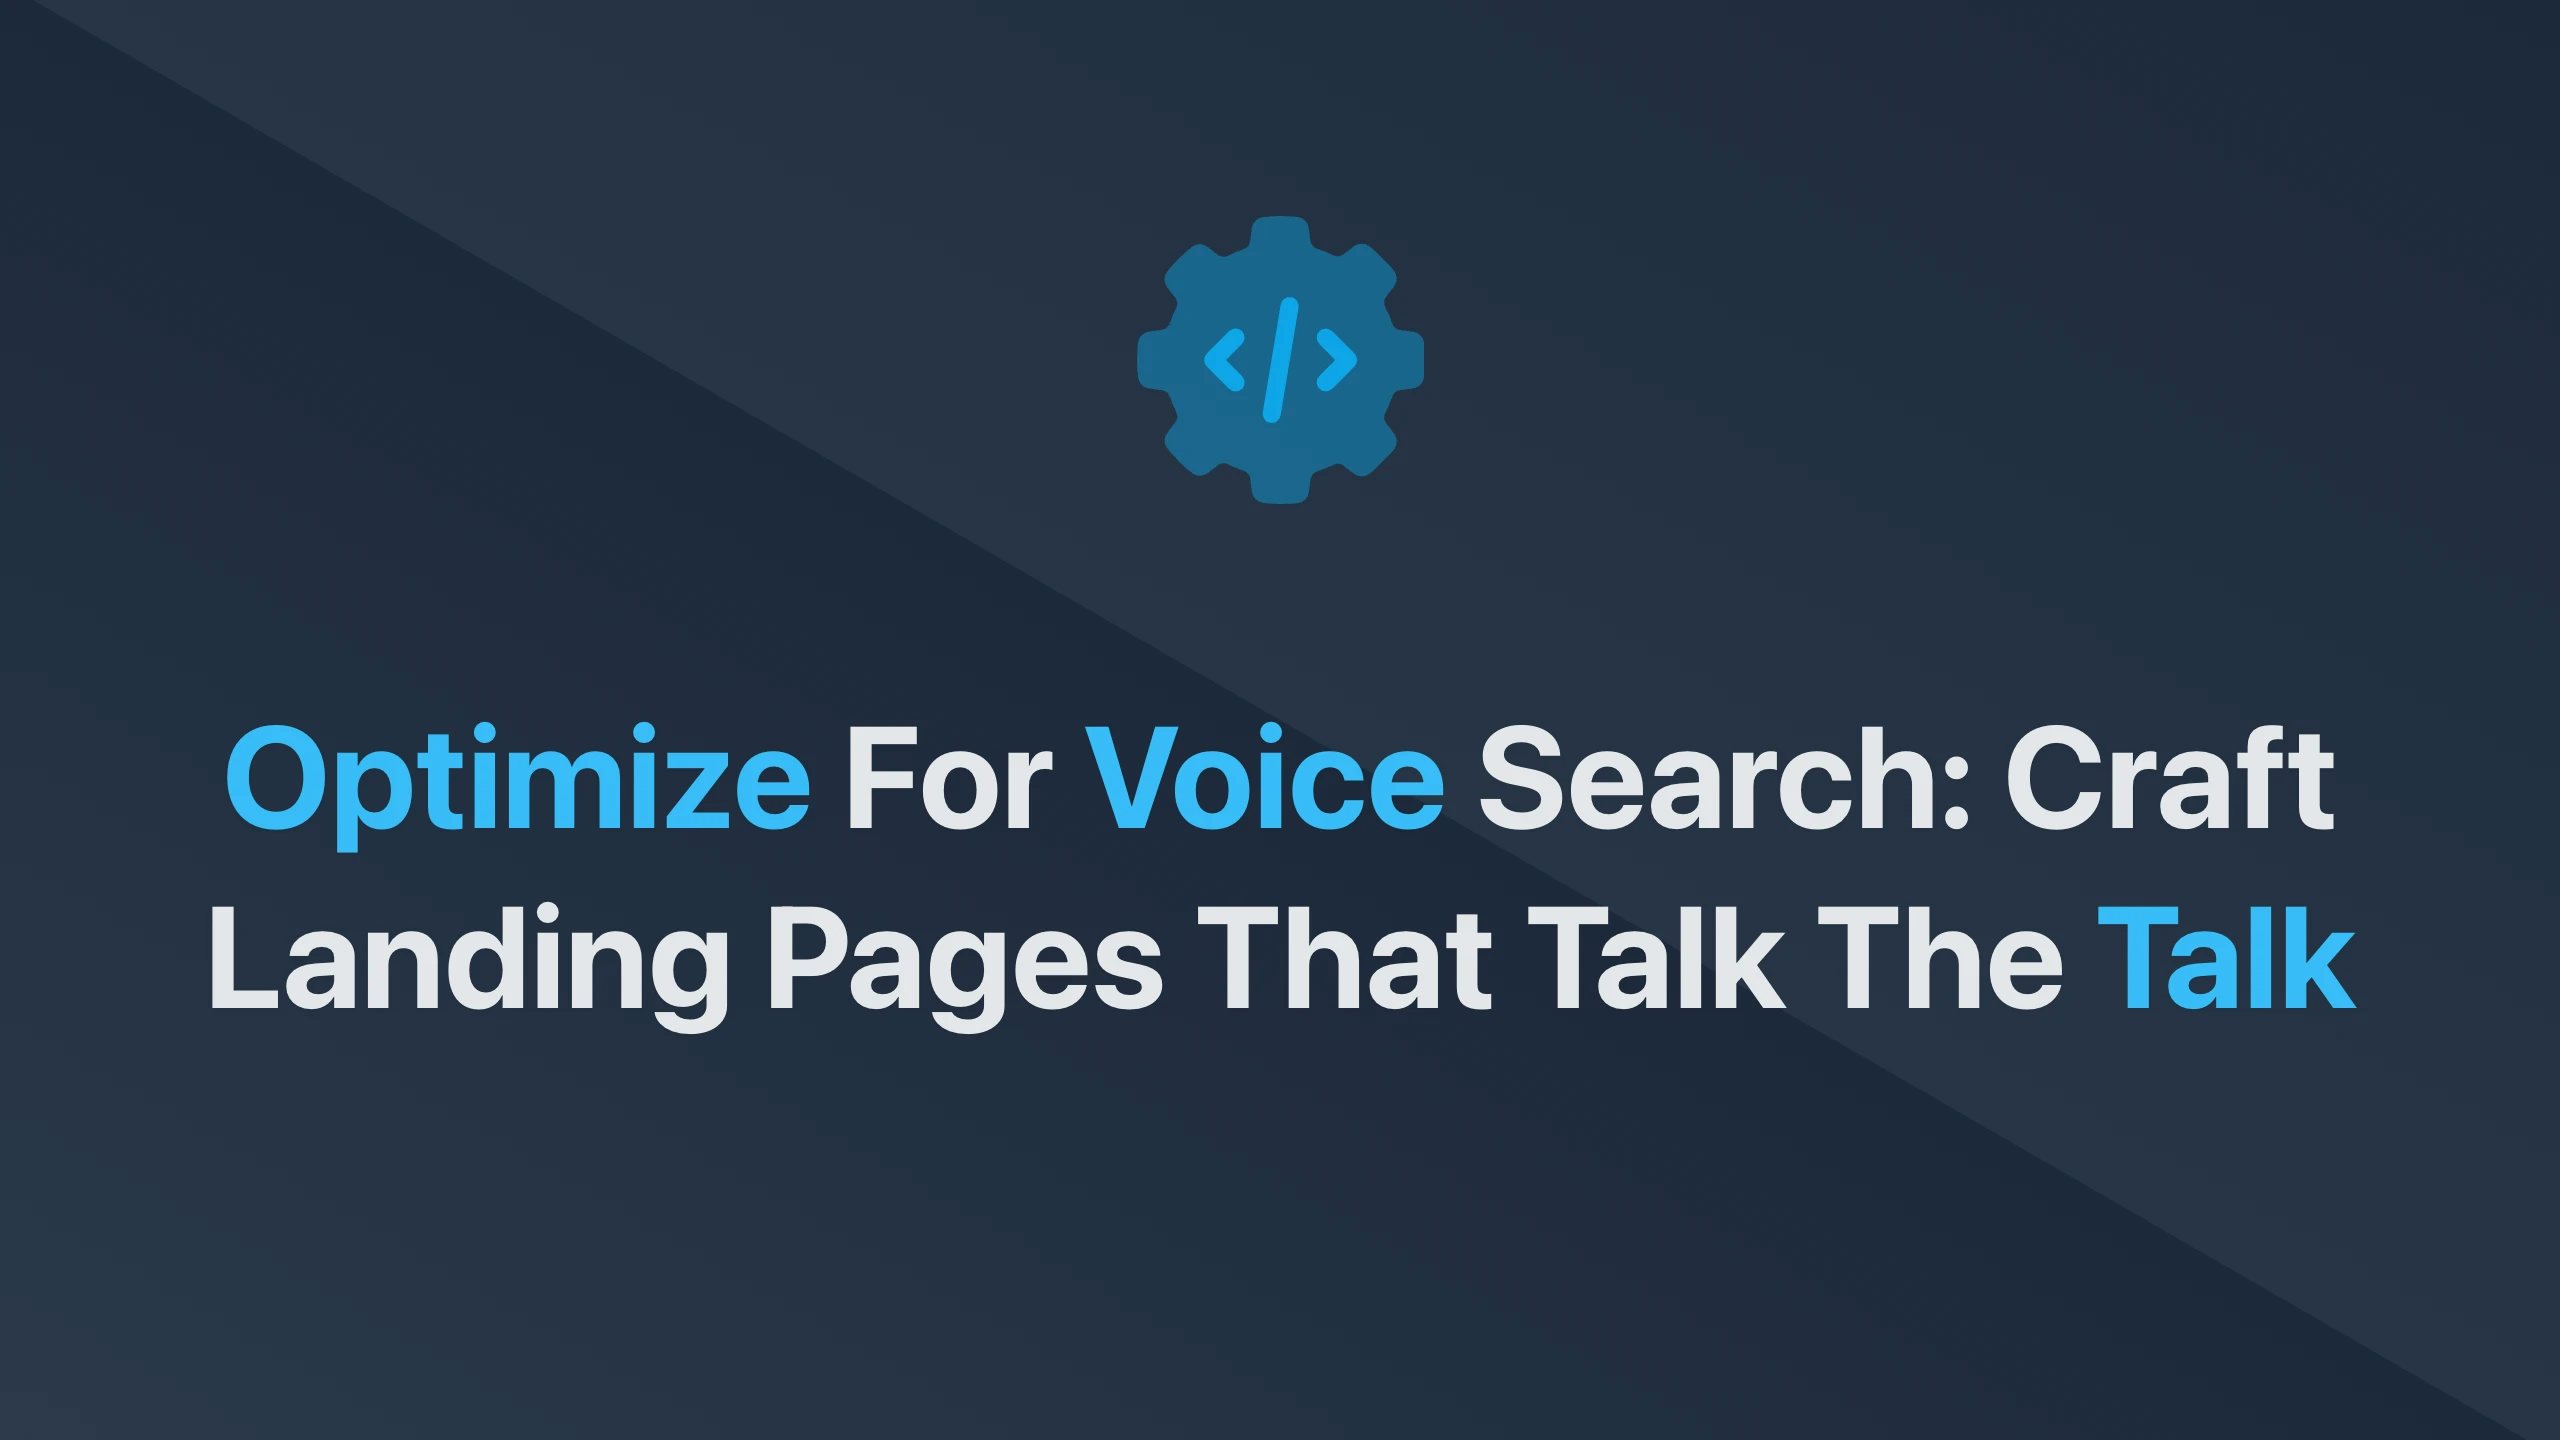 Cover Image for Optimize for Voice Search: Craft Landing Pages that Talk the Talk